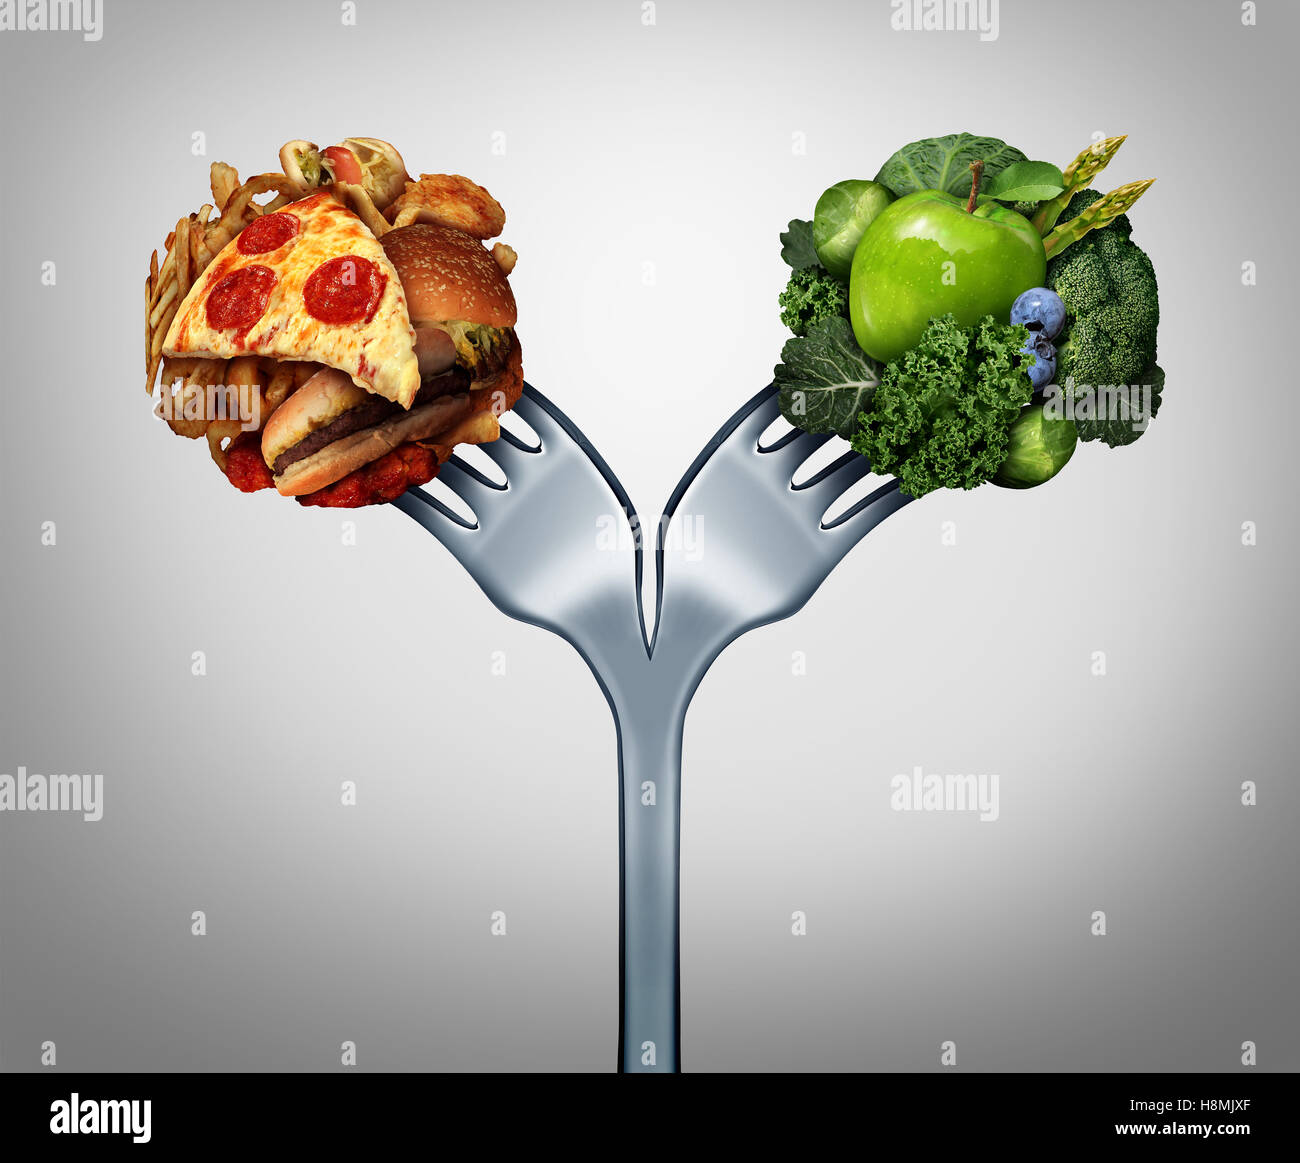 Unhealthy and healthy food and diet decision concept and nutrition choices dilemma between healthy good fresh fruit and vegetables or cholesterol rich fast food with a dinner fork divided in two with 3D illustration elements. Stock Photo